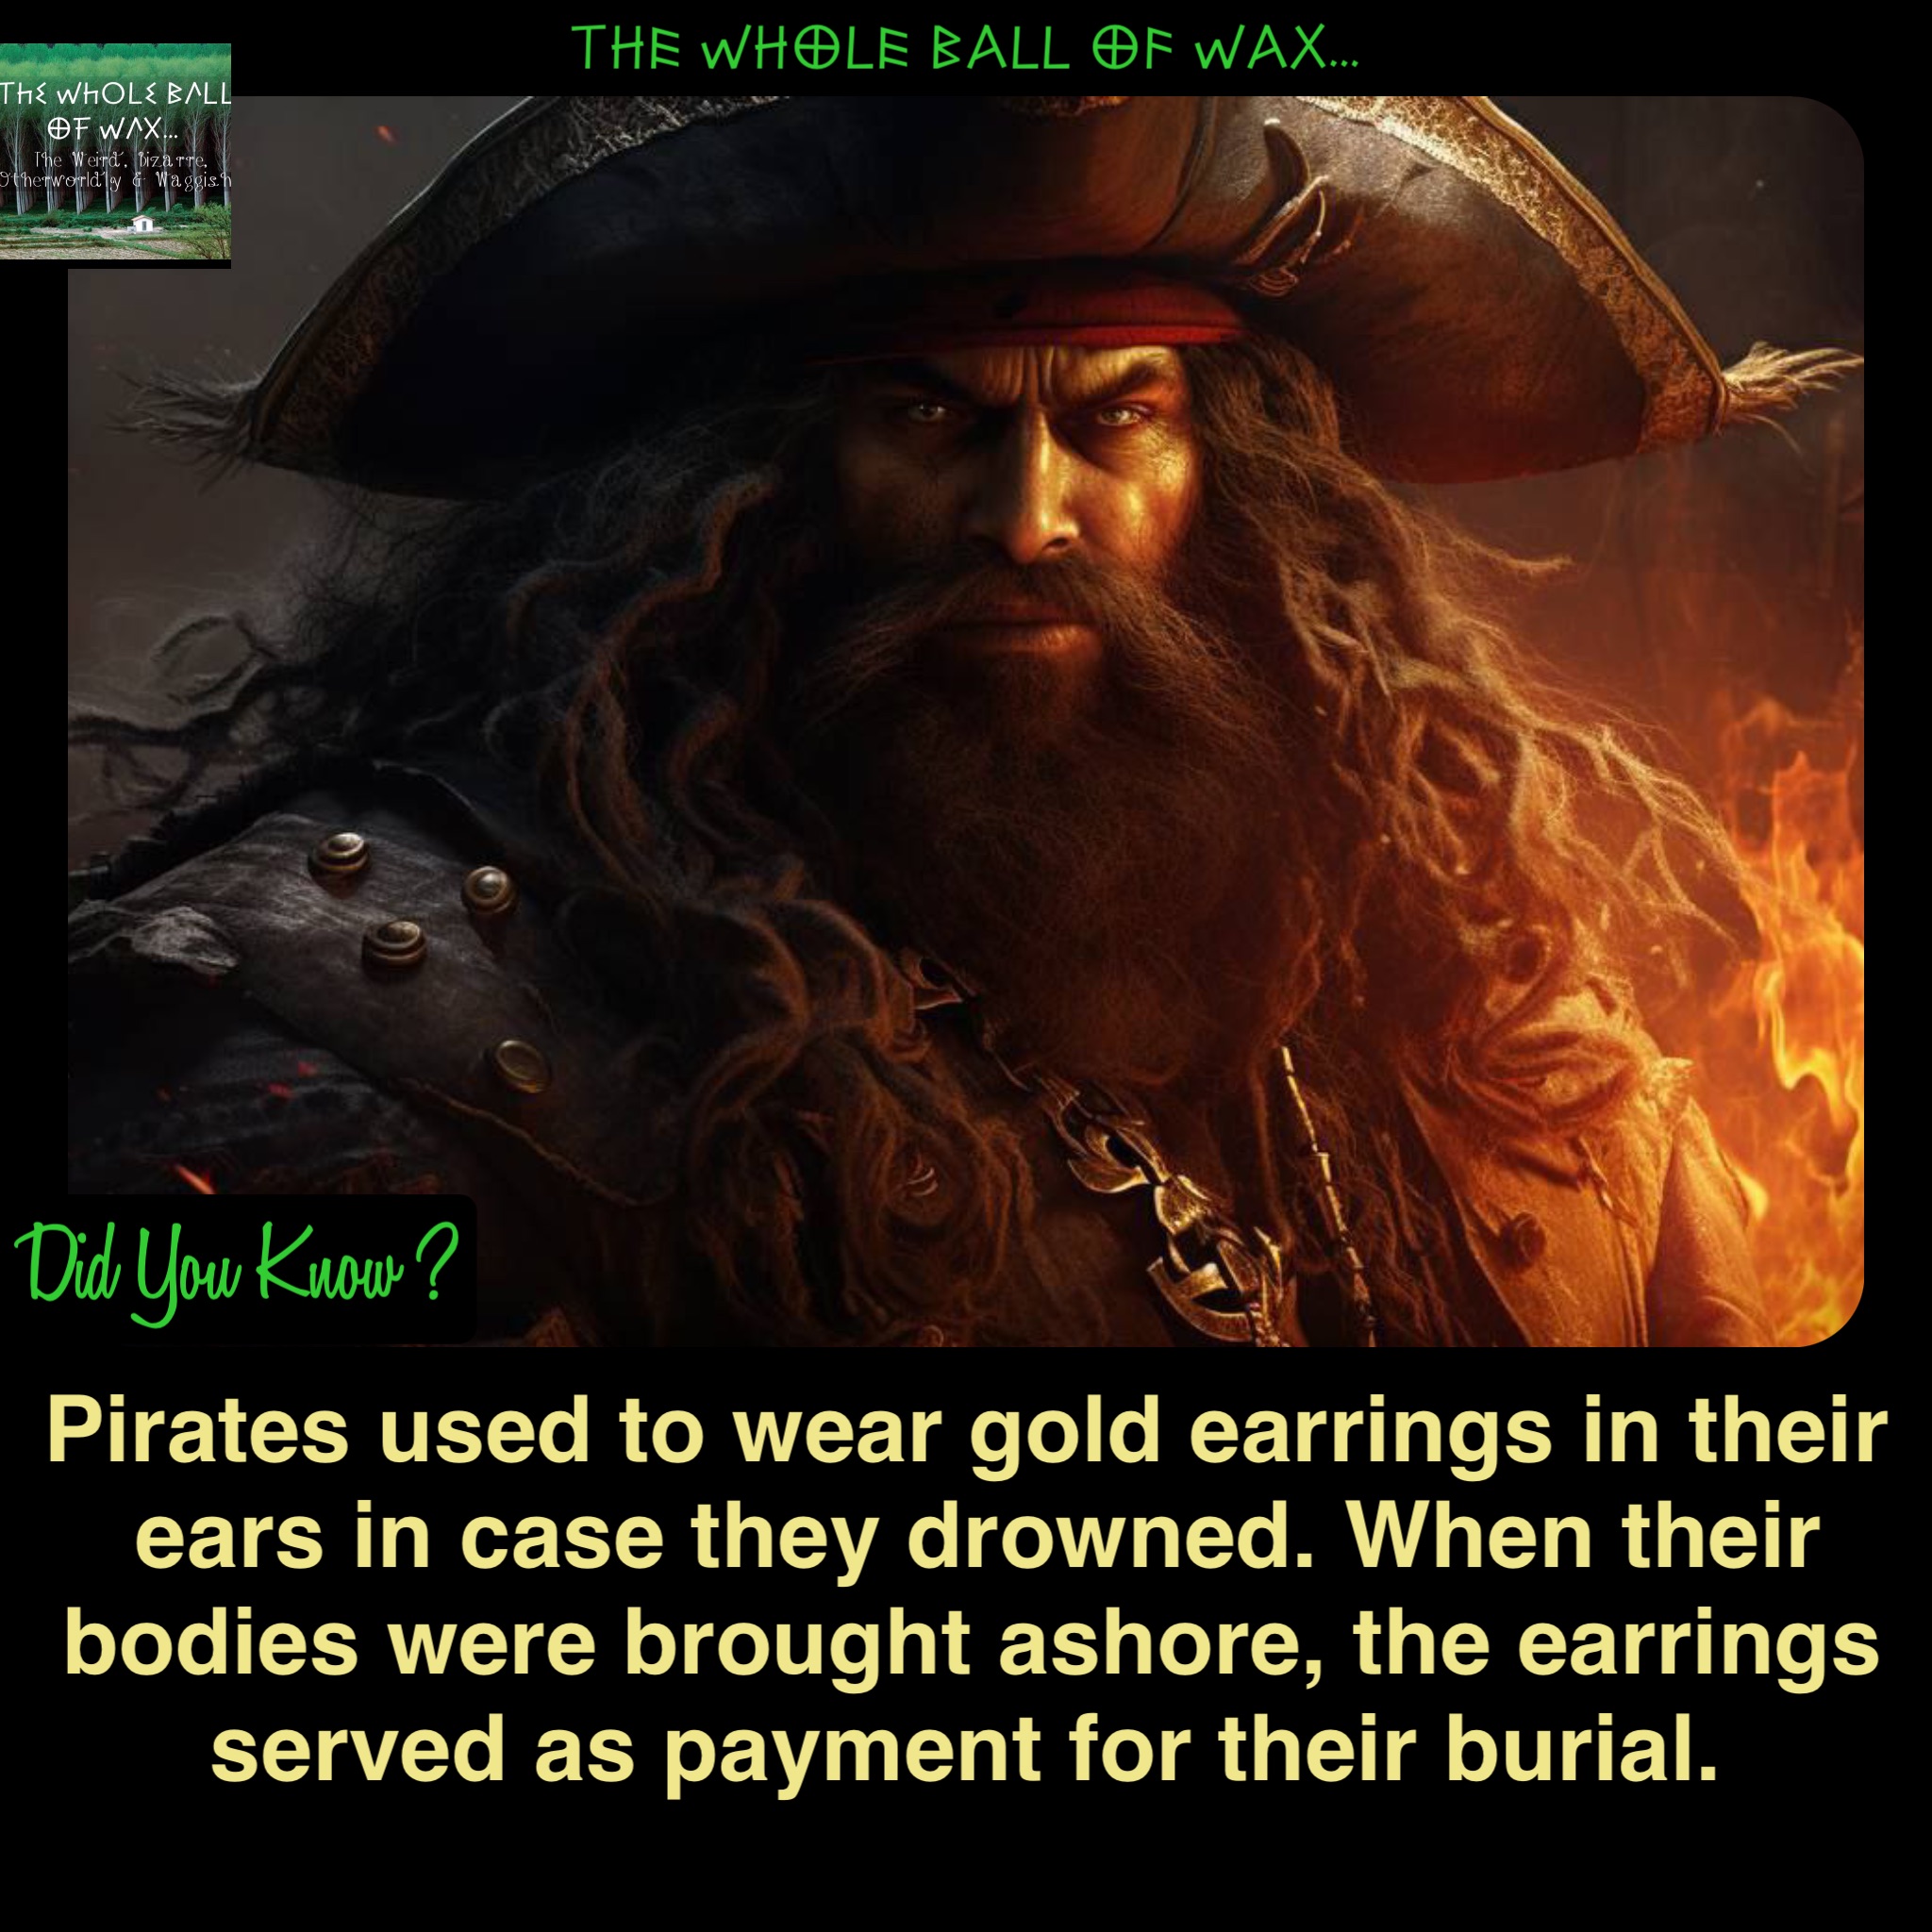 Double tap to edit Pirates used to wear gold earrings in their ears in case they drowned. When their bodies were brought ashore, the earrings served as payment for their burial.